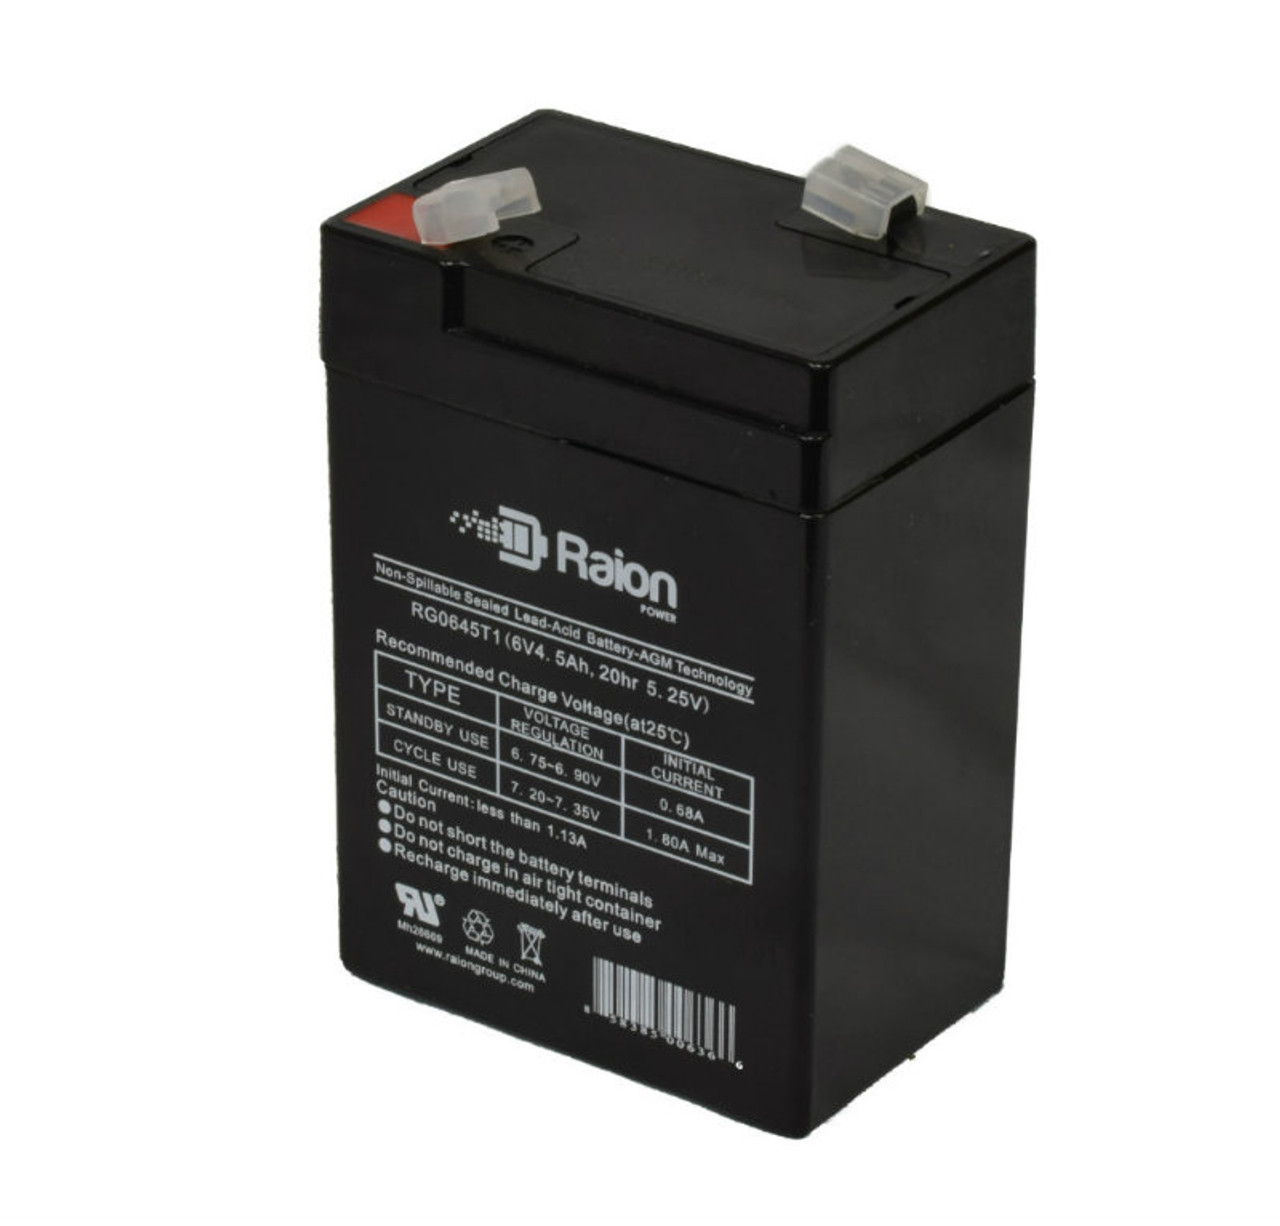 Raion Power RG0645T1 6V 4.5Ah Replacement Battery Cartridge for Light Alarms CE15BL